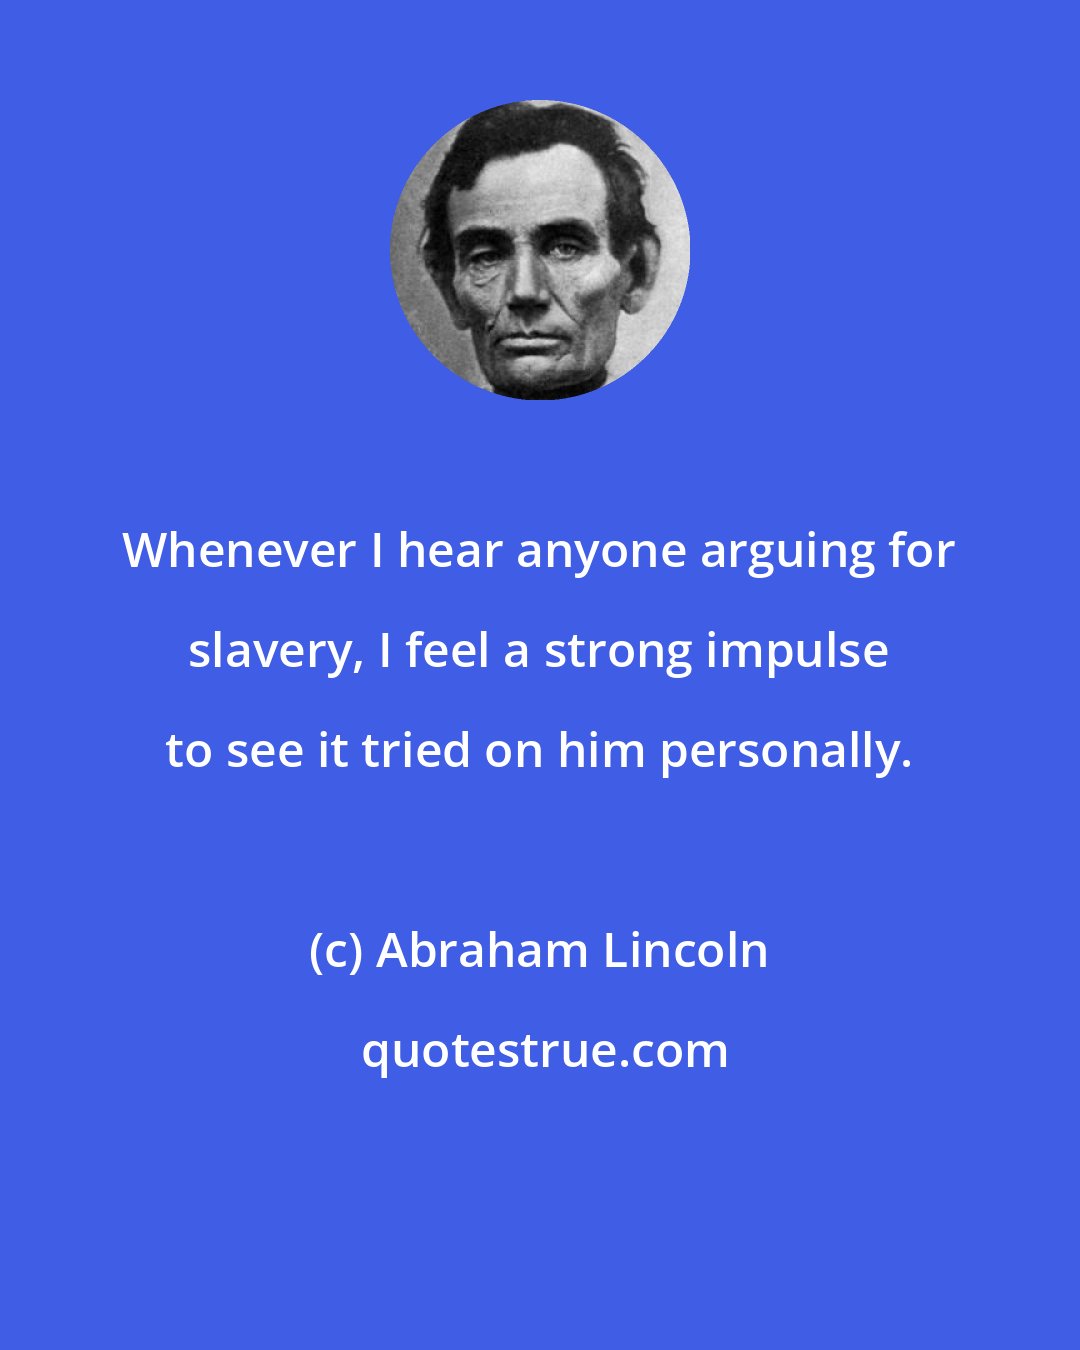 Abraham Lincoln: Whenever I hear anyone arguing for slavery, I feel a strong impulse to see it tried on him personally.